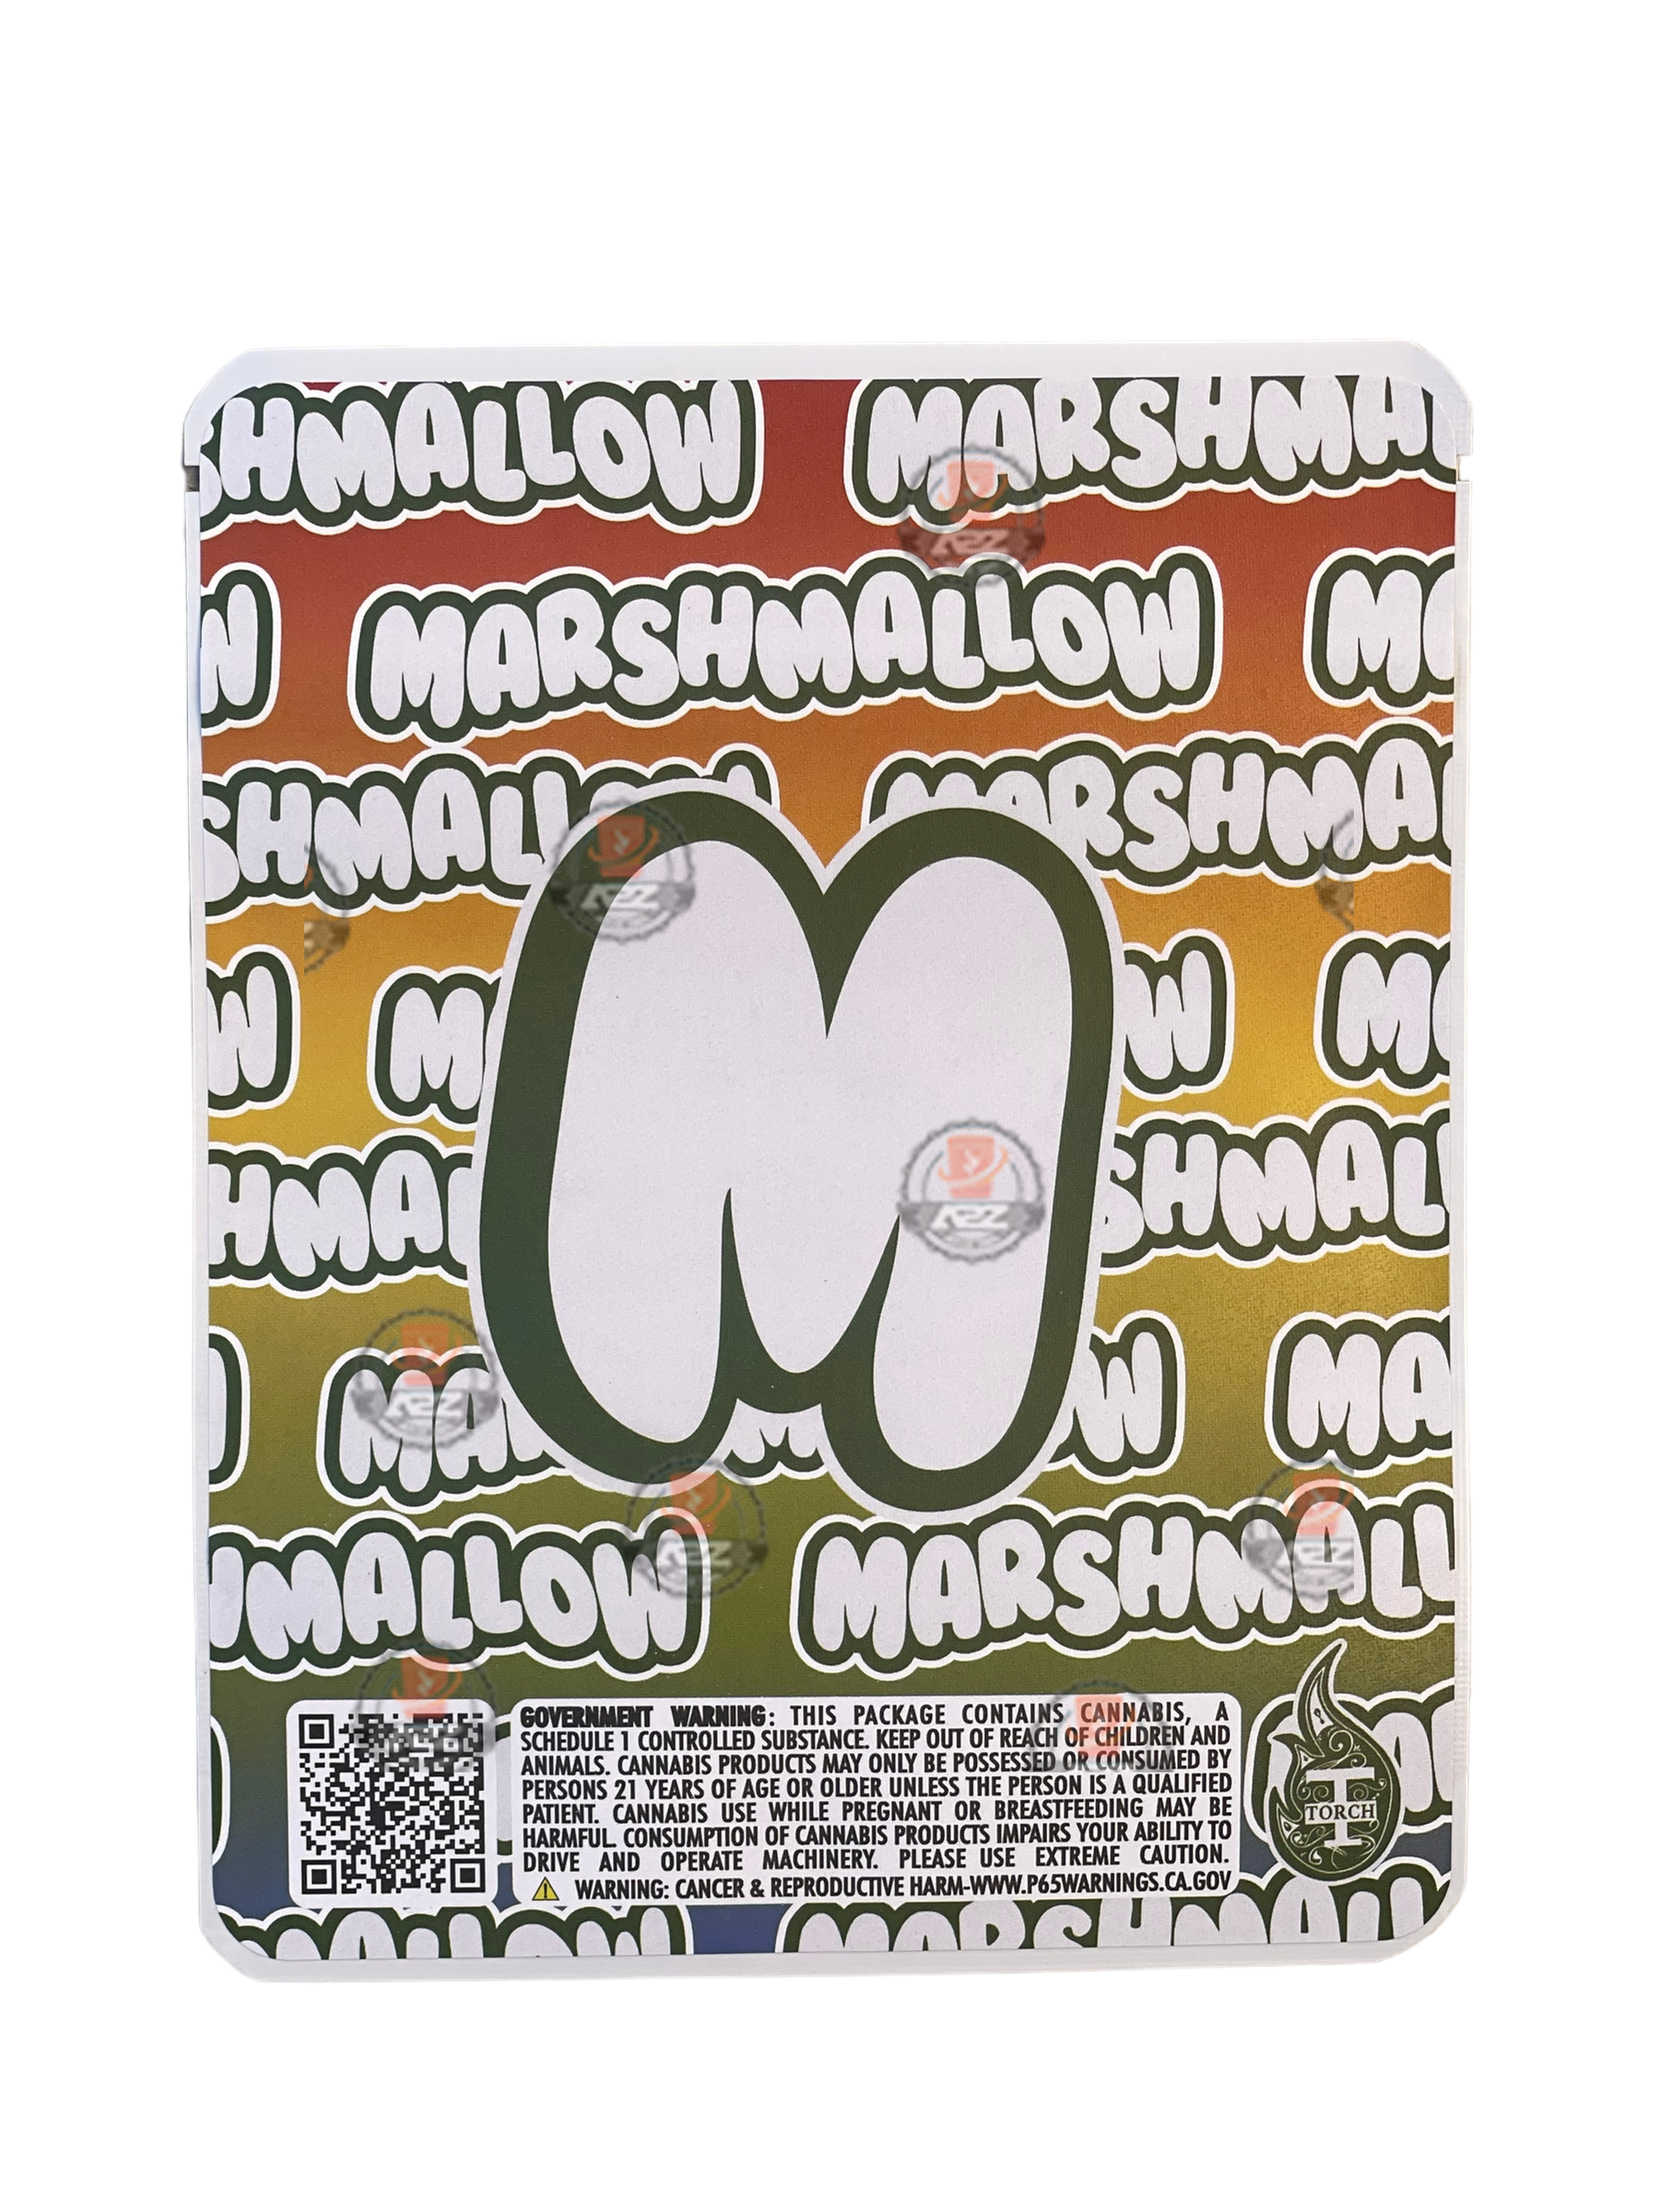 Sprinklez Funfetti Marshmallow Mylar Bags 3.5g Sticker base Bag -With stickers and labels